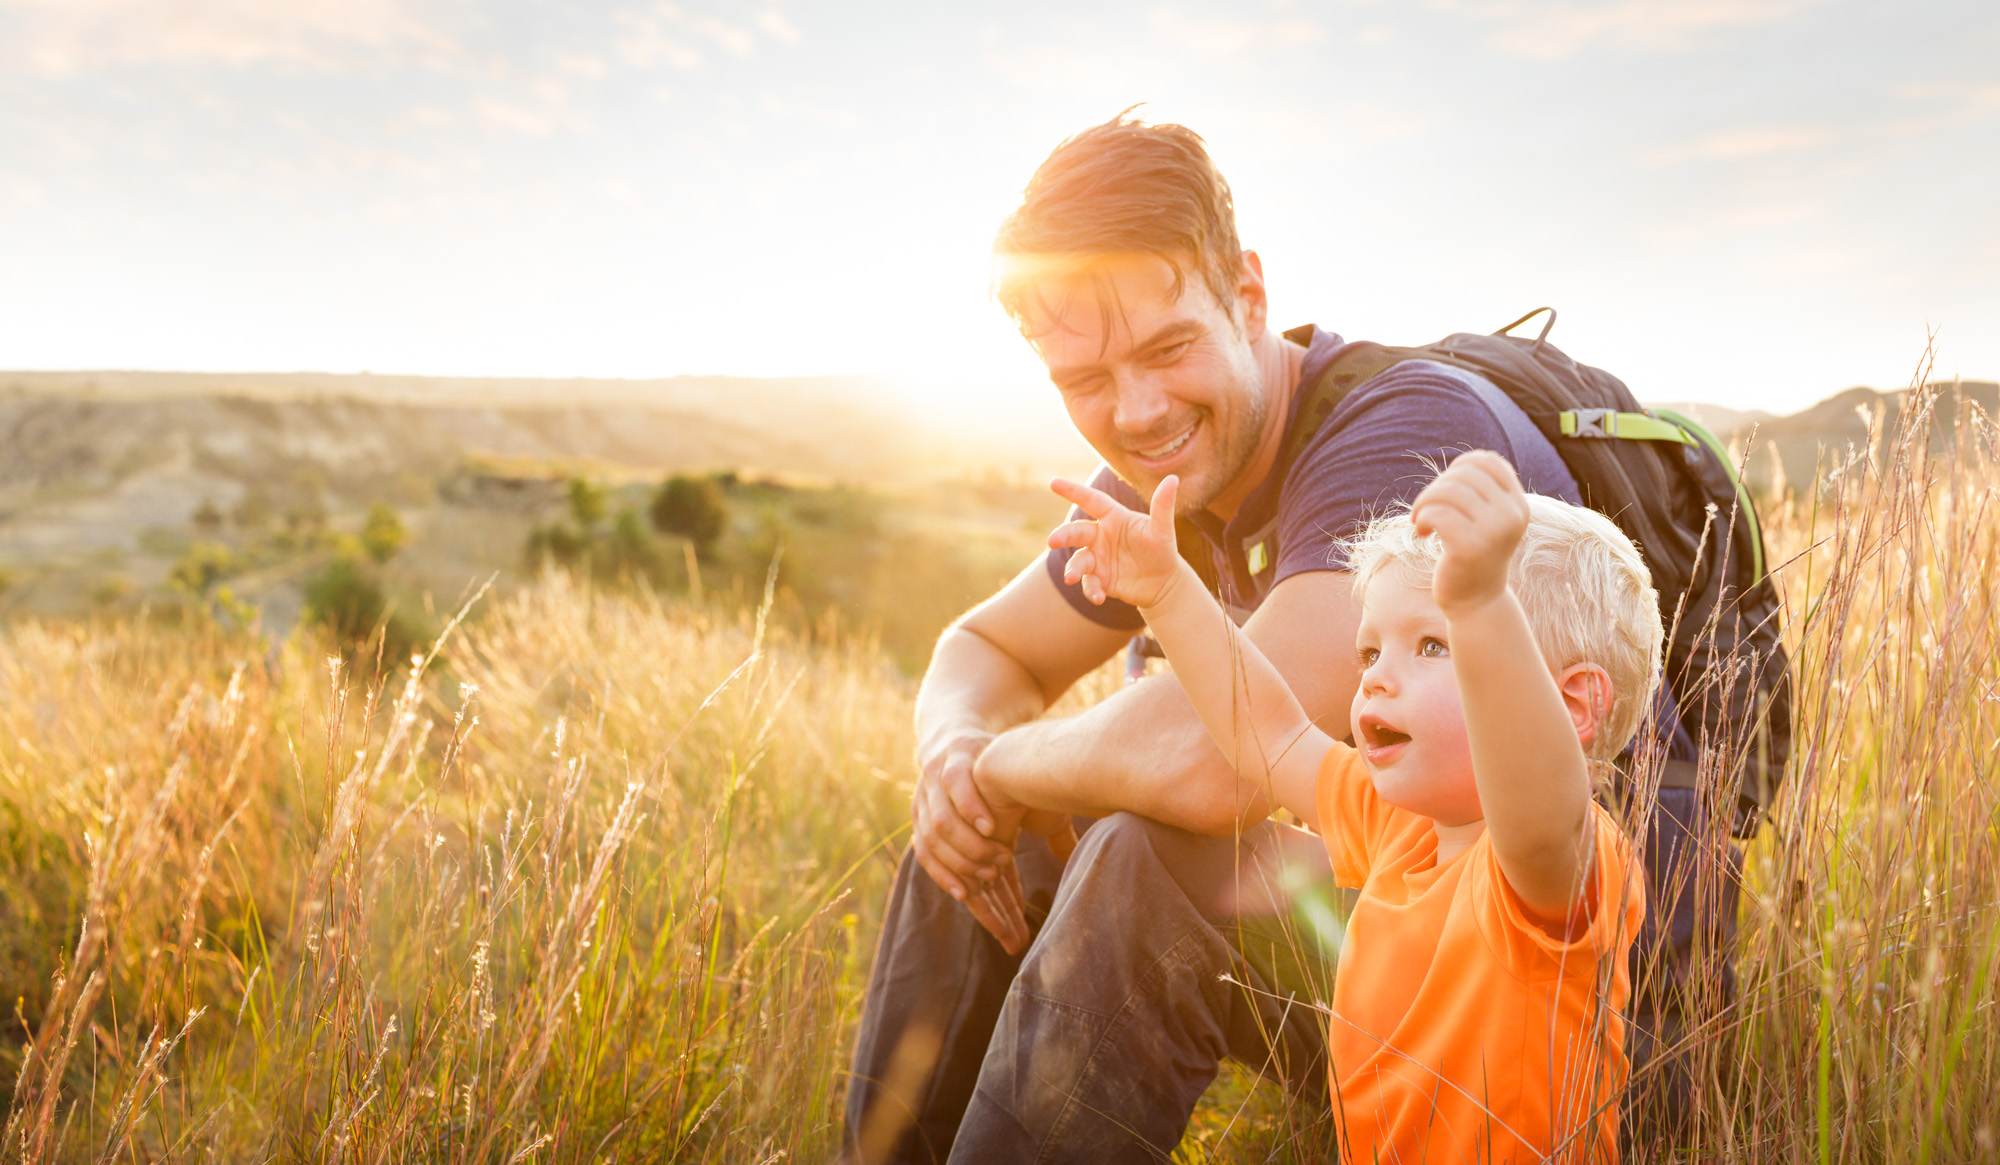 Josh Duhamel sits and smiles at a little boy admiring nature in this sunset photo for North Dakota Tourism, photographed by Tyler Stableford.